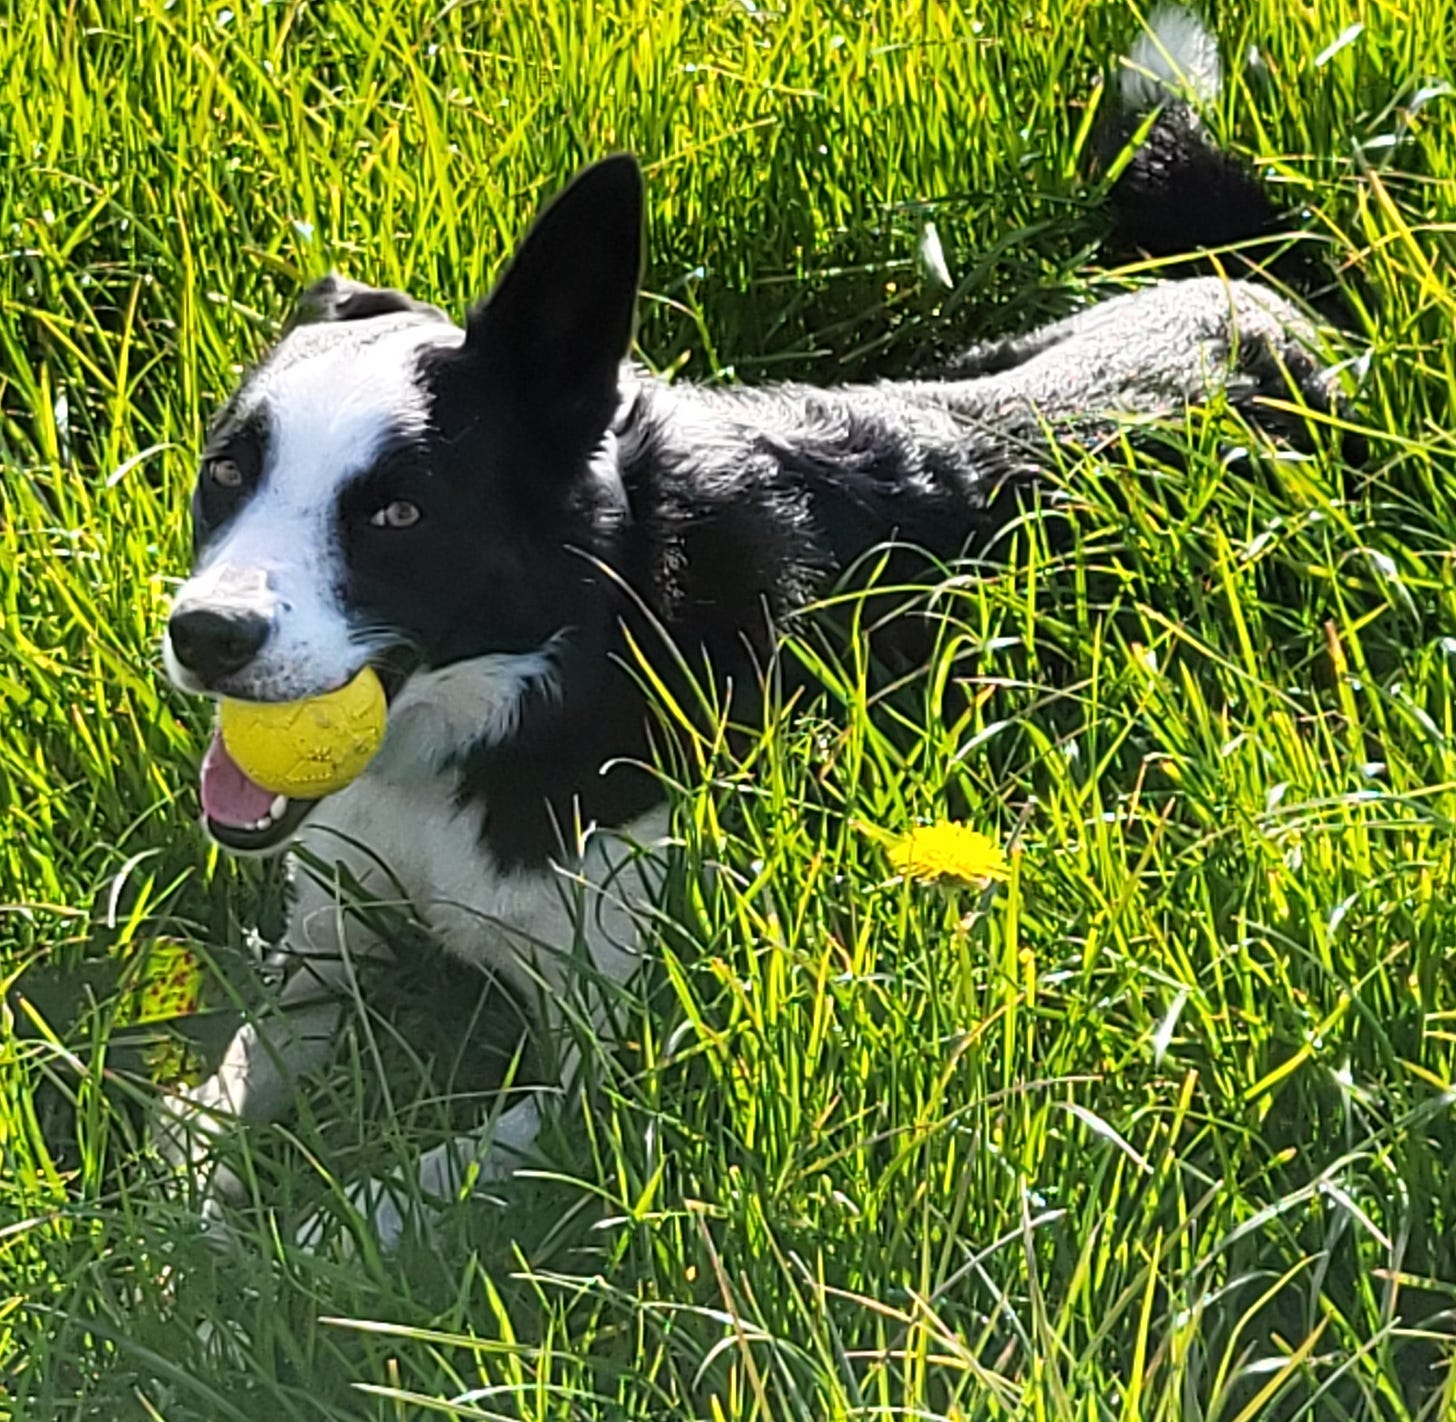 Collie dog with yellow ball, one ear cocked, one ear down, lying in long grass